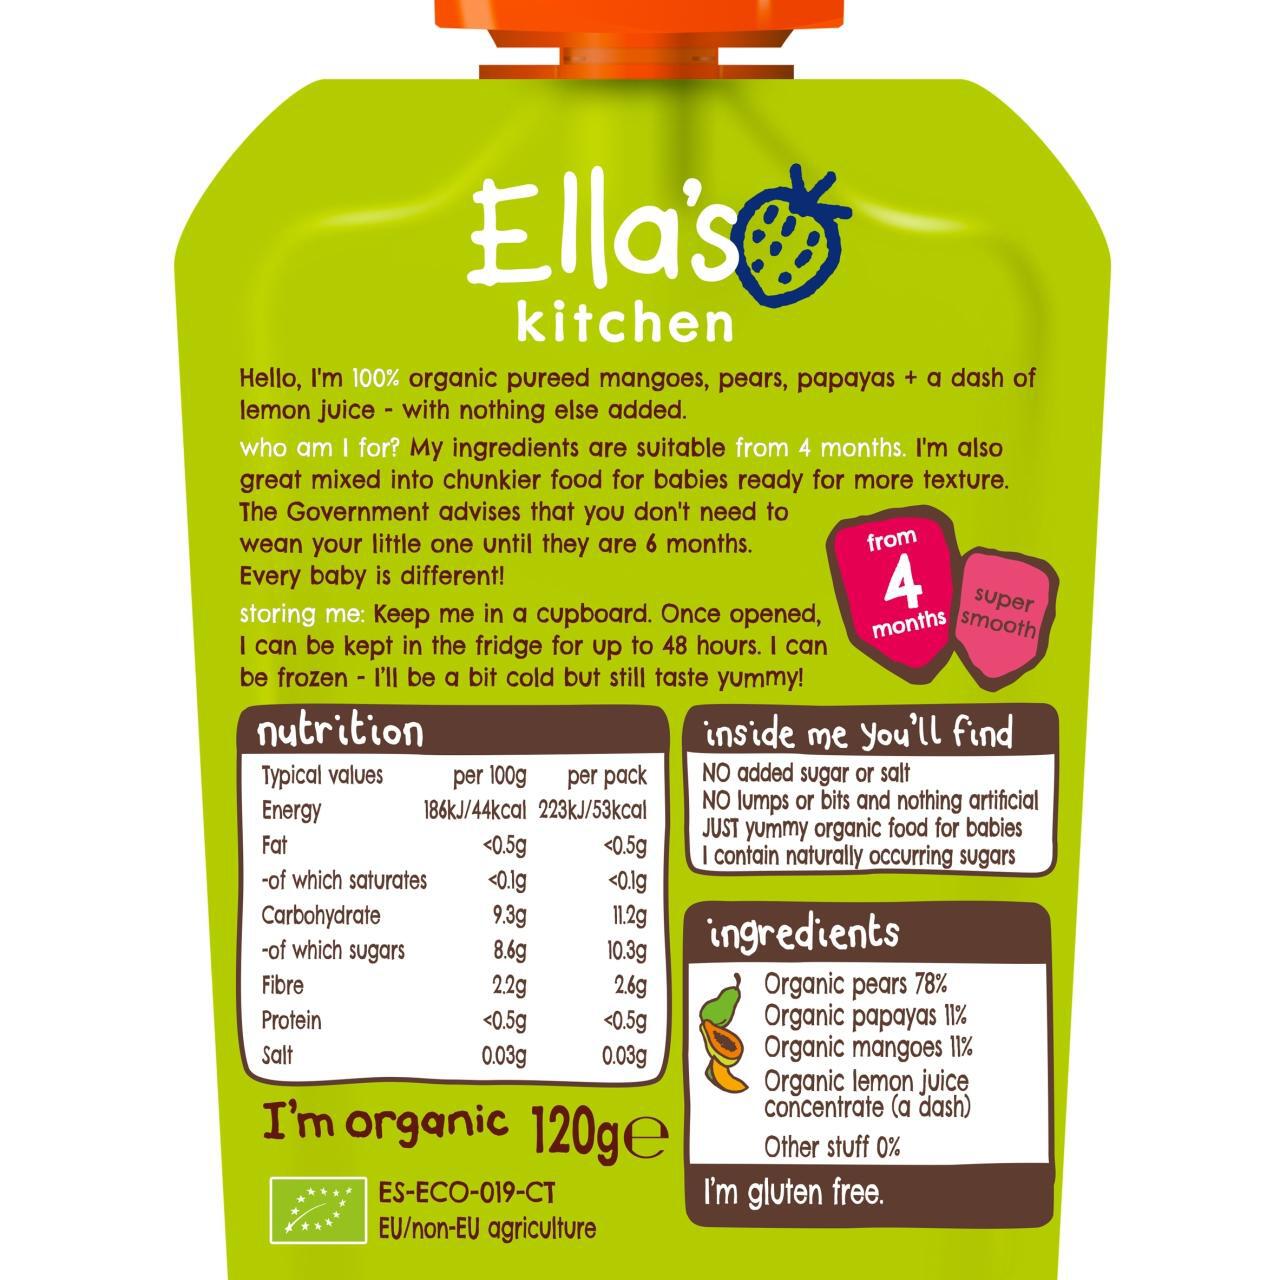 Ella's Kitchen Mangoes, Pears and Papaya Baby Food Pouch 4+ Months 120g